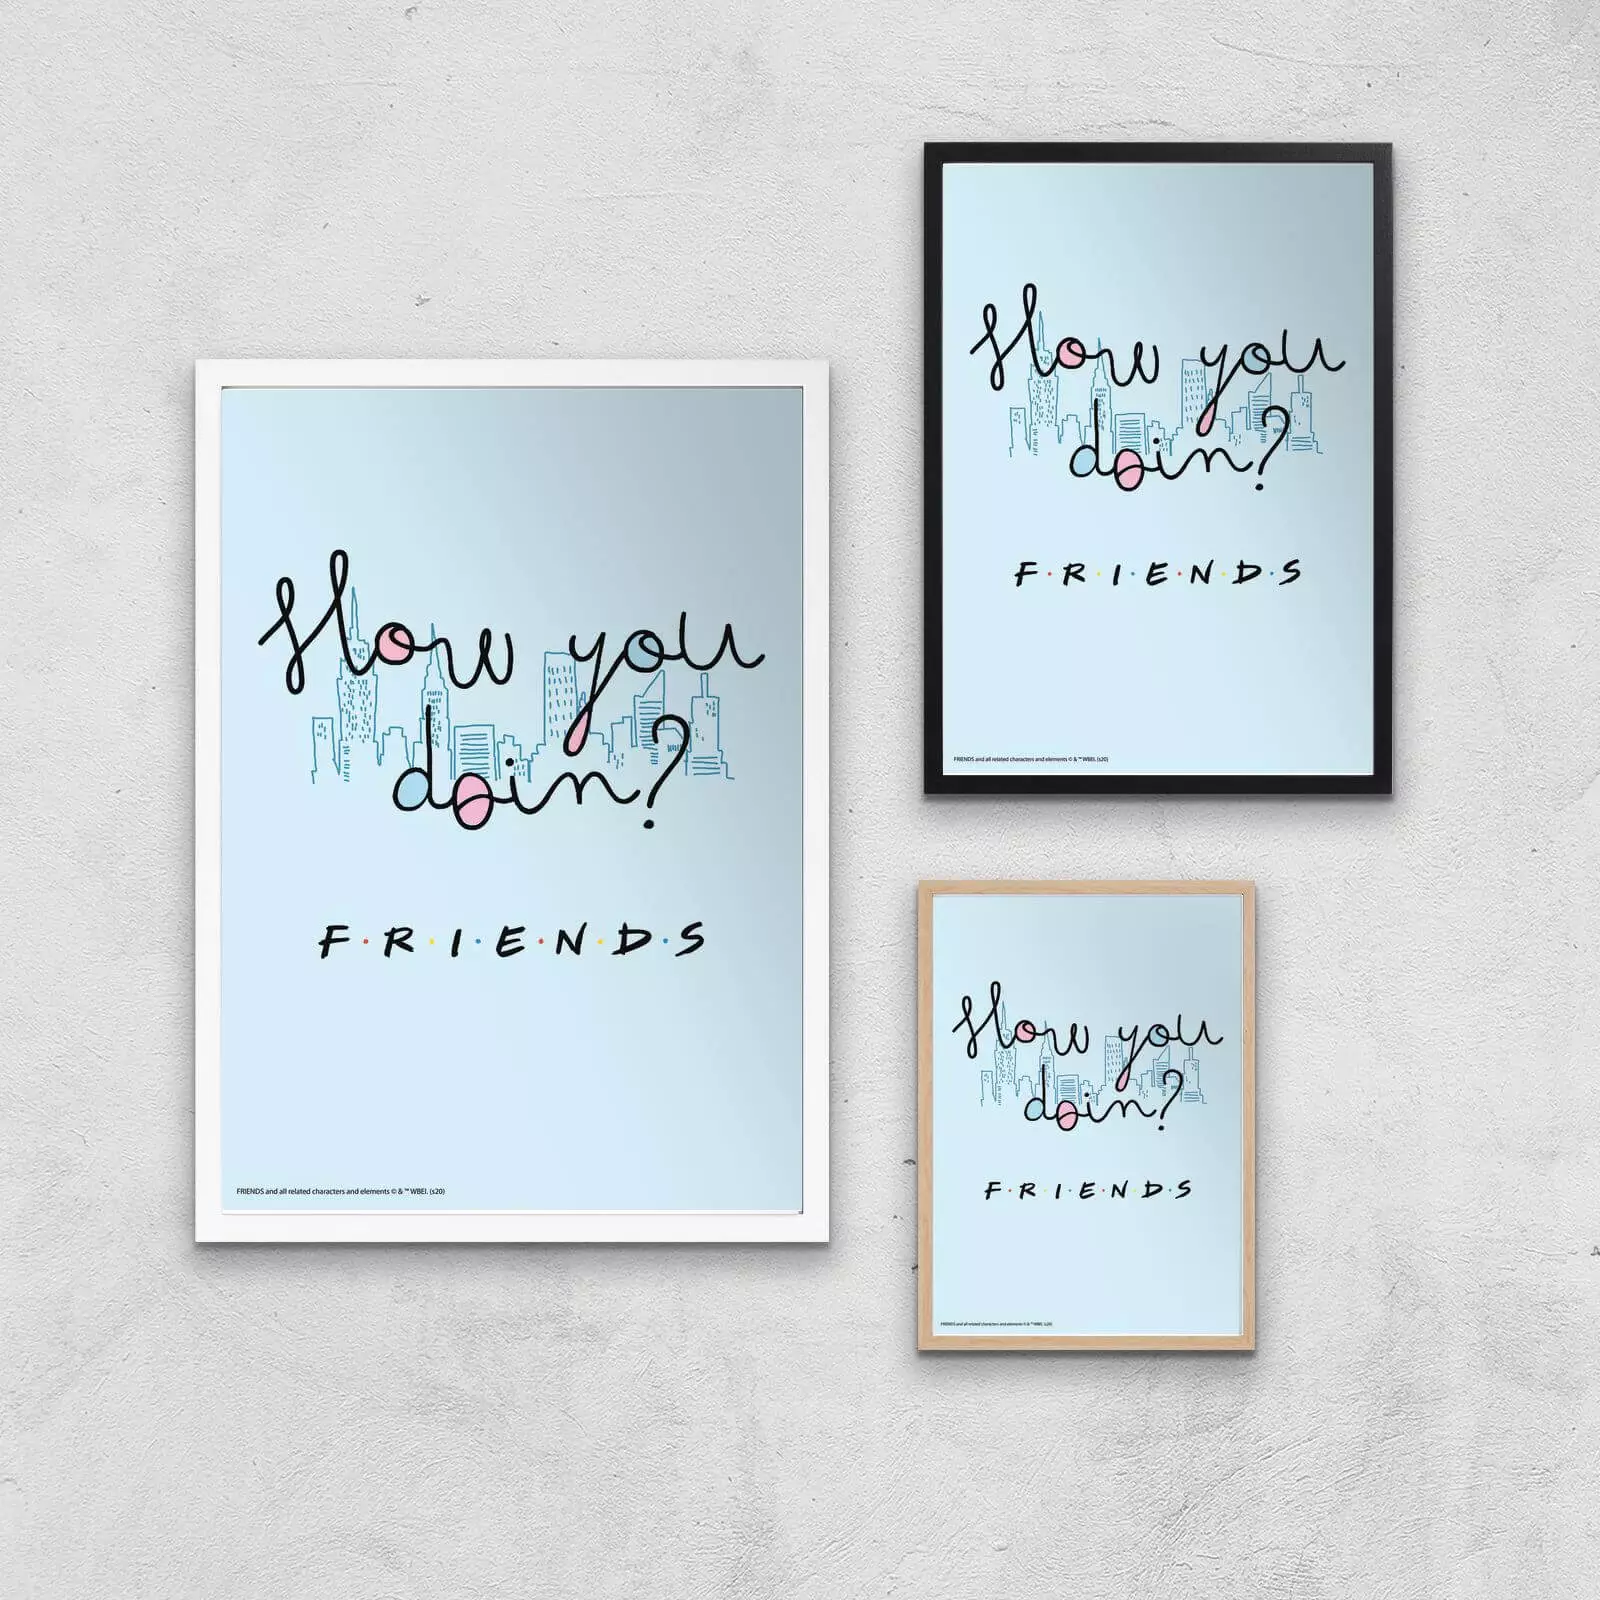 These 'How you doin'?' wall art prints start at £9.99 (